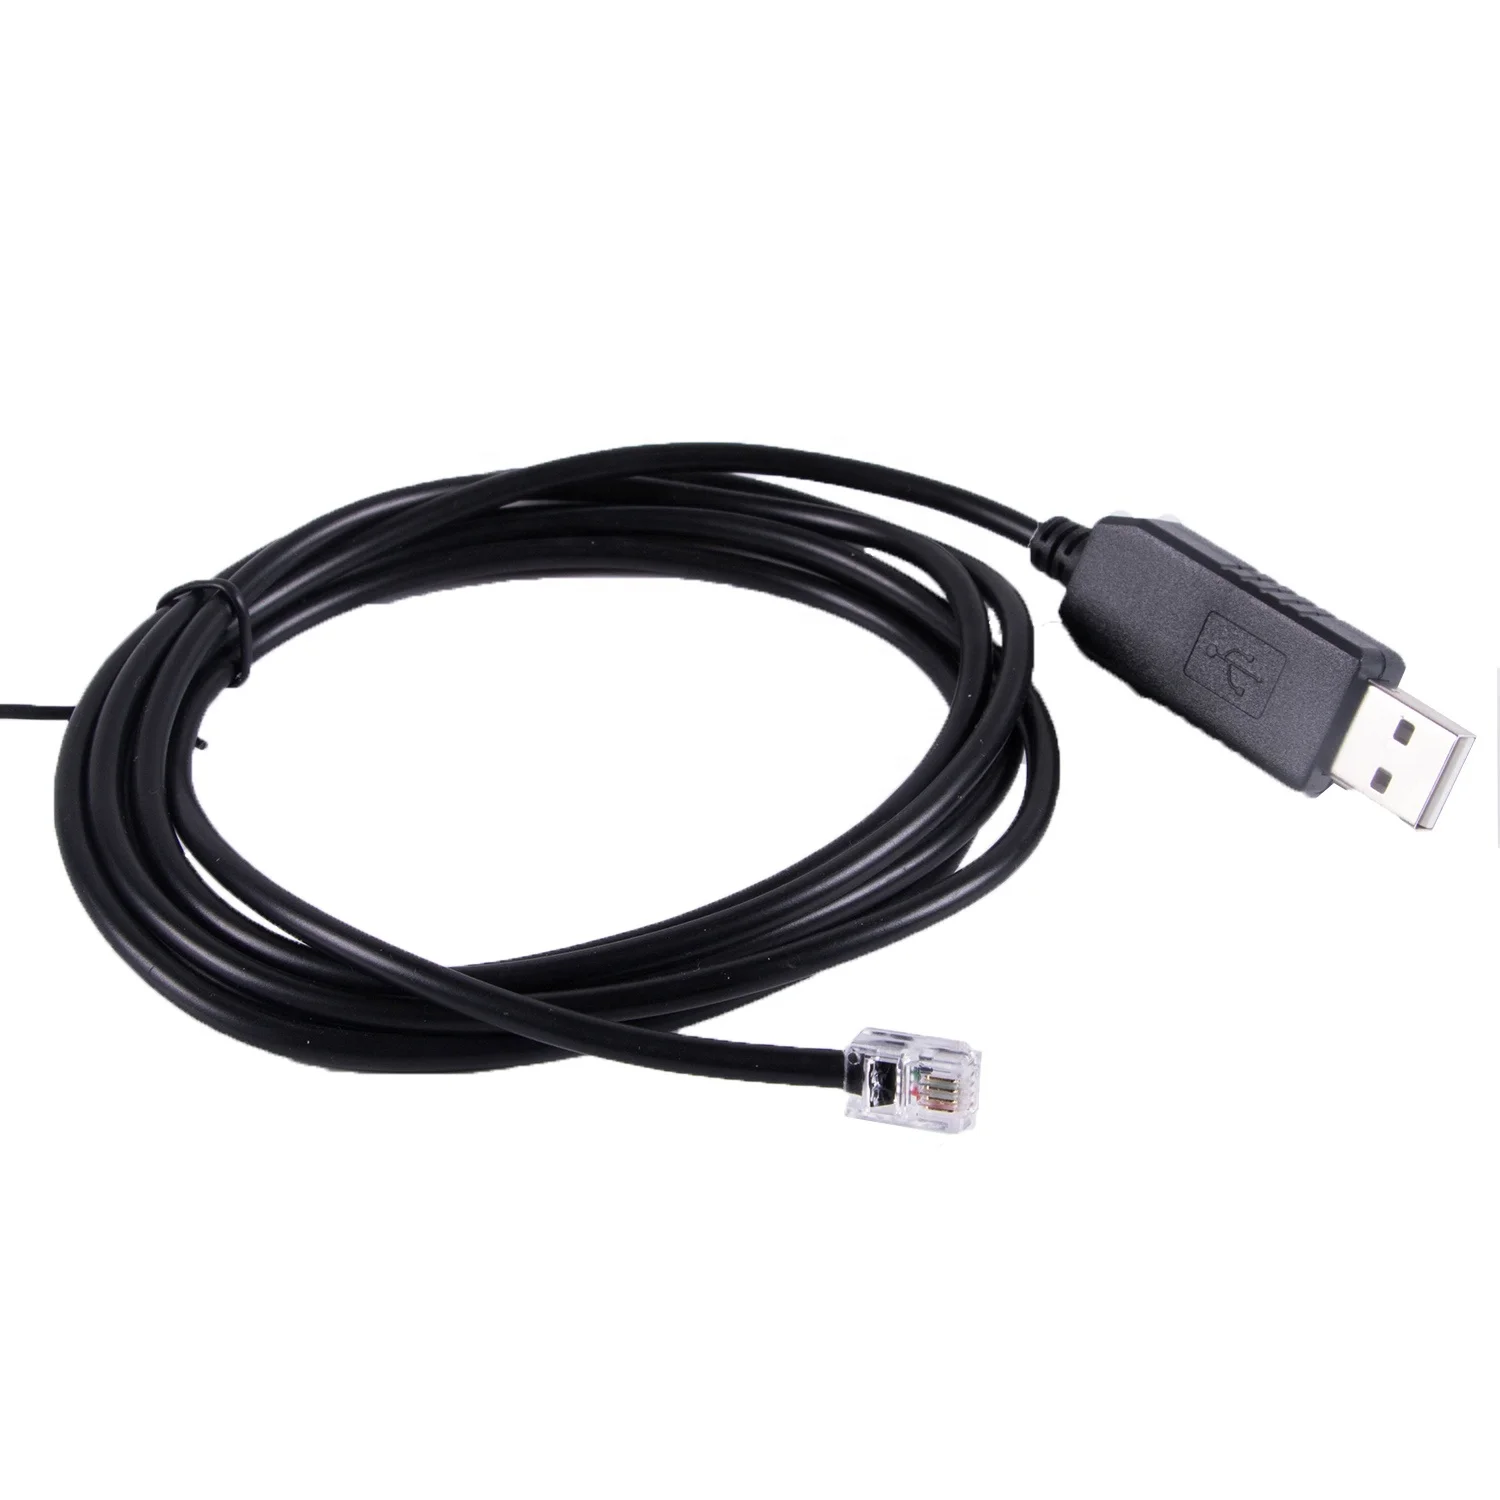 Meade 505 Telescope PC Cable CP2102 USB RS232 to 4P4C RJ10 Adapter Control CABLE 